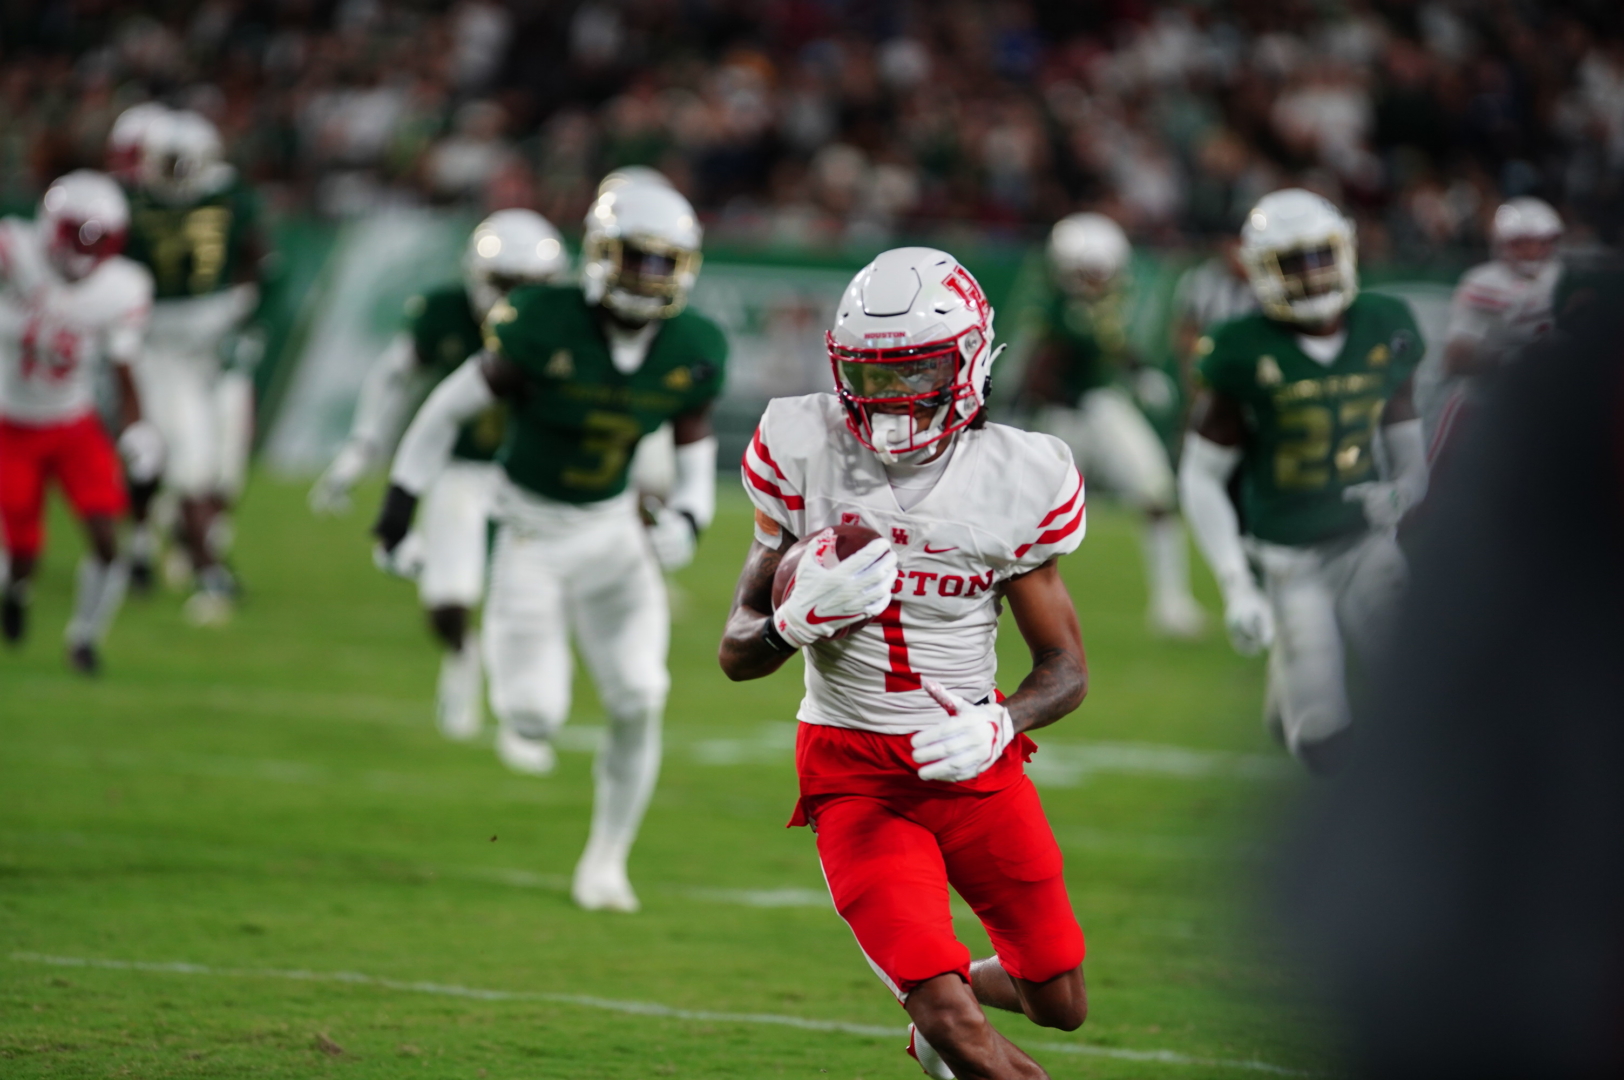 Sophomore wide receiver Nathaniel Dell leads the Cougars in receptions, receiving yards and receiving touchdowns this season. | Courtesy of UH athletics